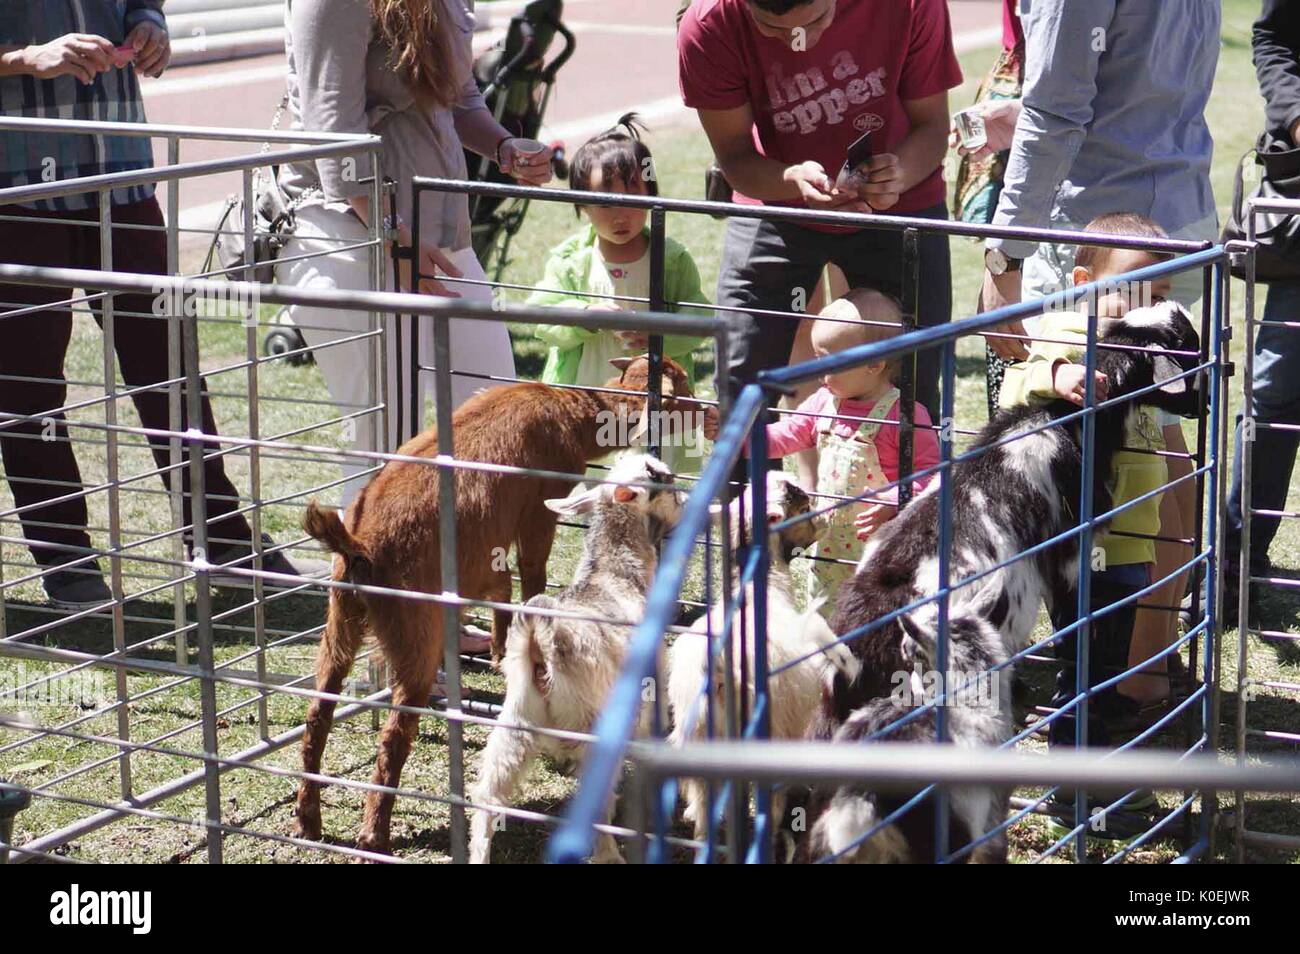 Families with young children visit a petting zoo, which has been set up for Spring Fair, an annual festival with music, food, shopping, and more that takes place every spring on the Homewood campus of the Johns Hopkins University in Baltimore, Maryland. 2014. Courtesy Eric Chen. Stock Photo